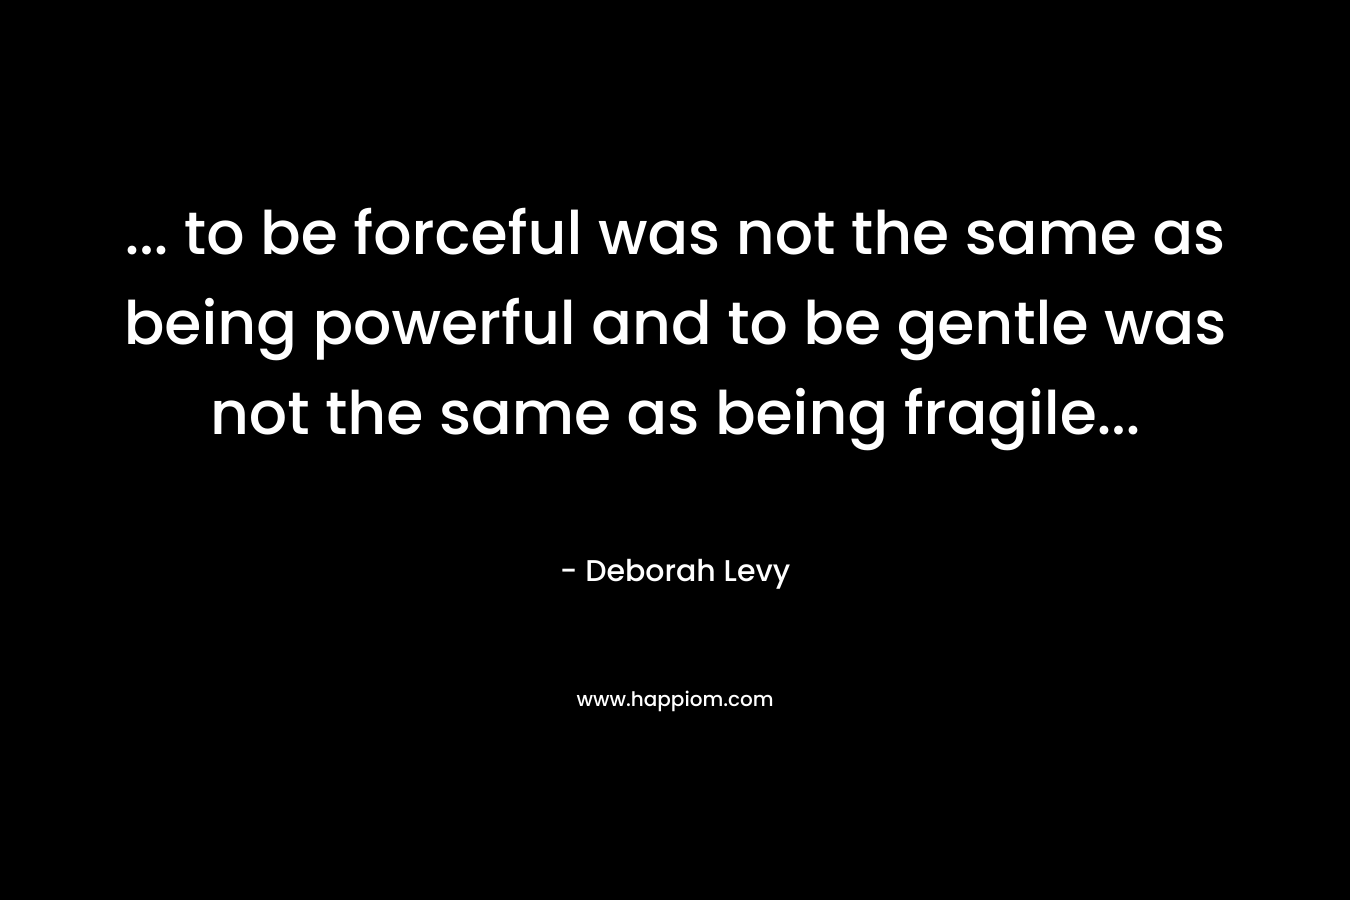 … to be forceful was not the same as being powerful and to be gentle was not the same as being fragile… – Deborah Levy